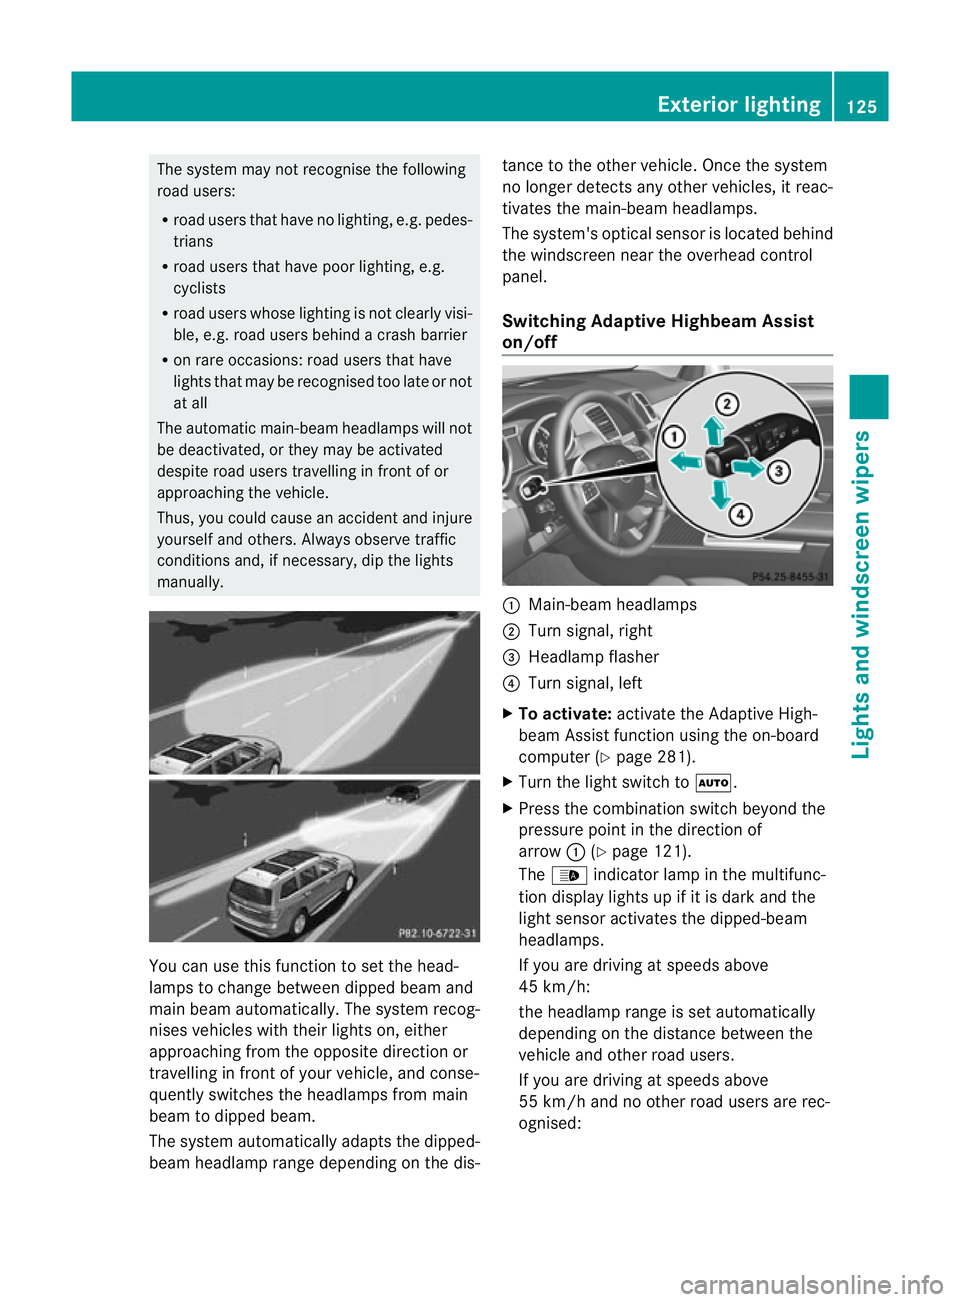 MERCEDES-BENZ GL SUV 2012  Owners Manual The system may not recognise the following
road users:
R road users that have no lighting, e.g. pedes-
trians
R road users that have poor lighting, e.g.
cyclists
R road users whose lightin gisnot clea